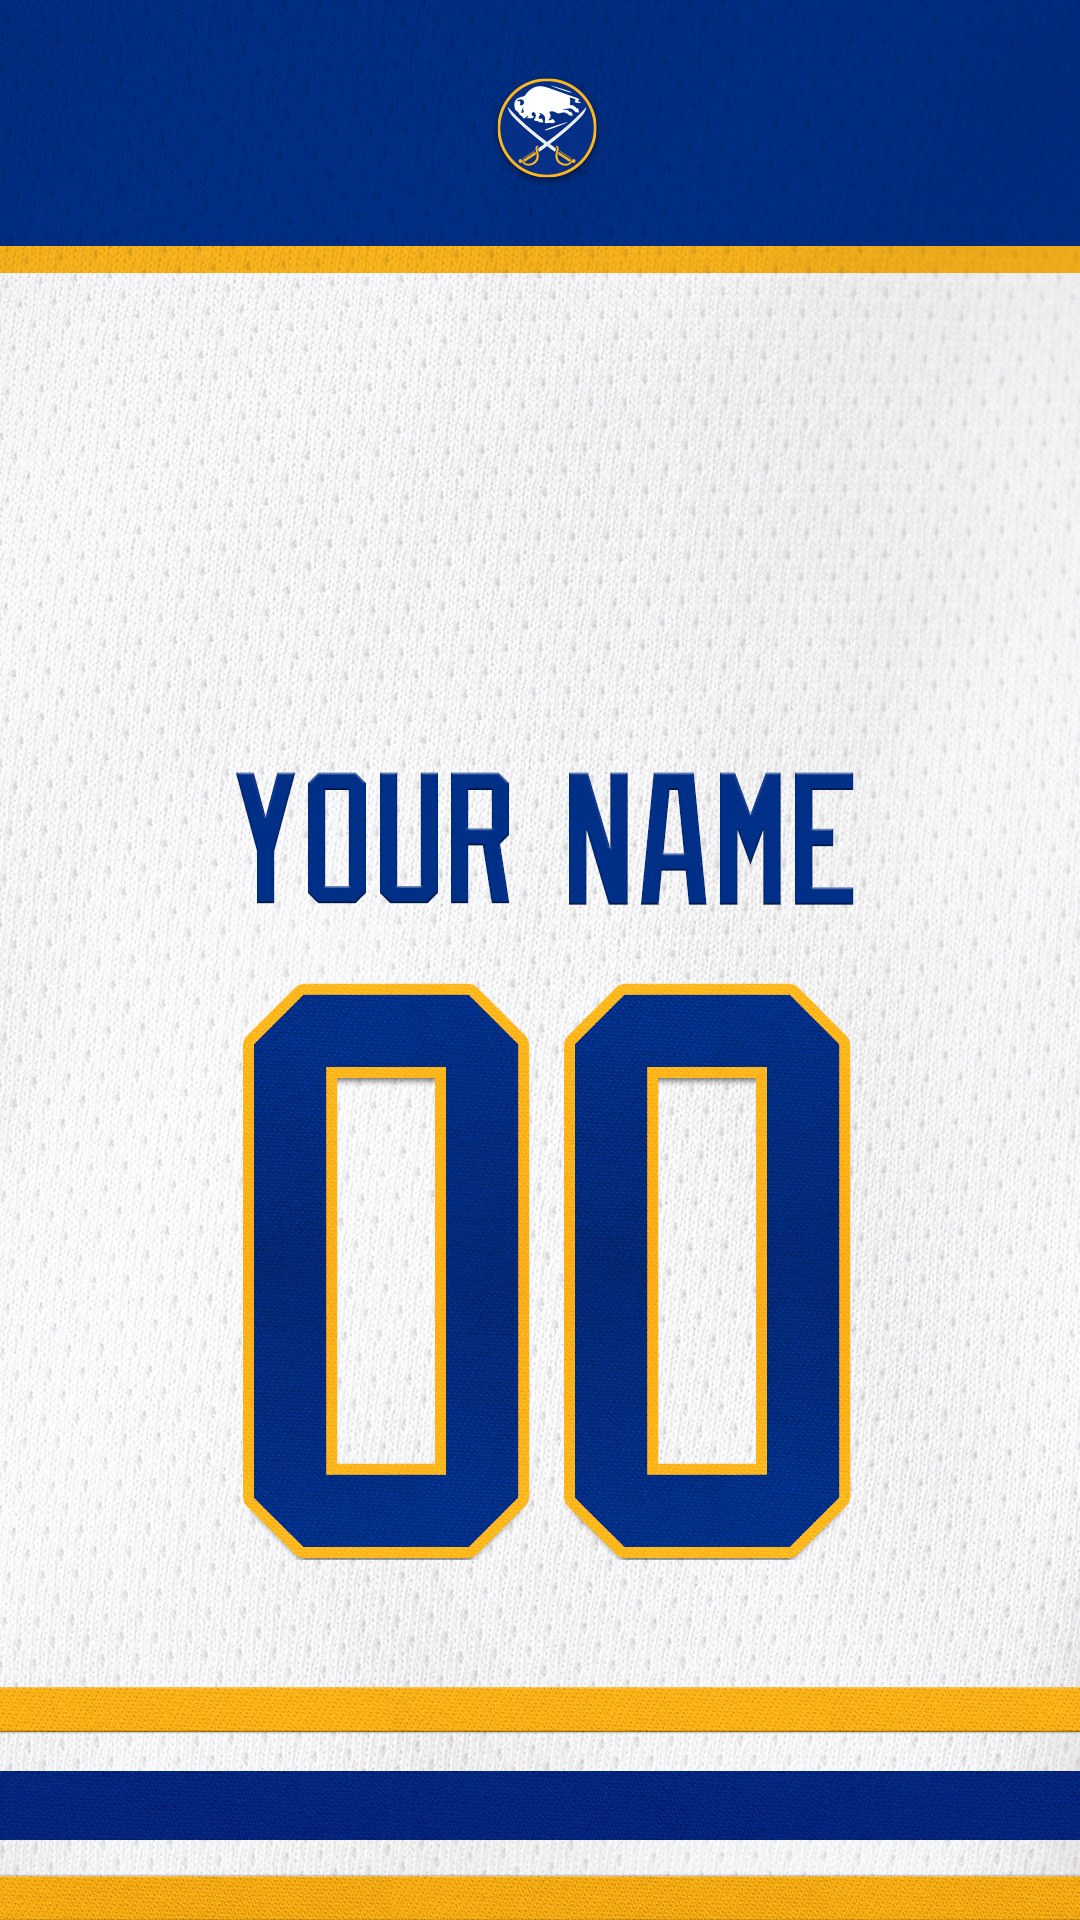 Buffalo Sabres on X: We're making 500 custom wallpapers in honor